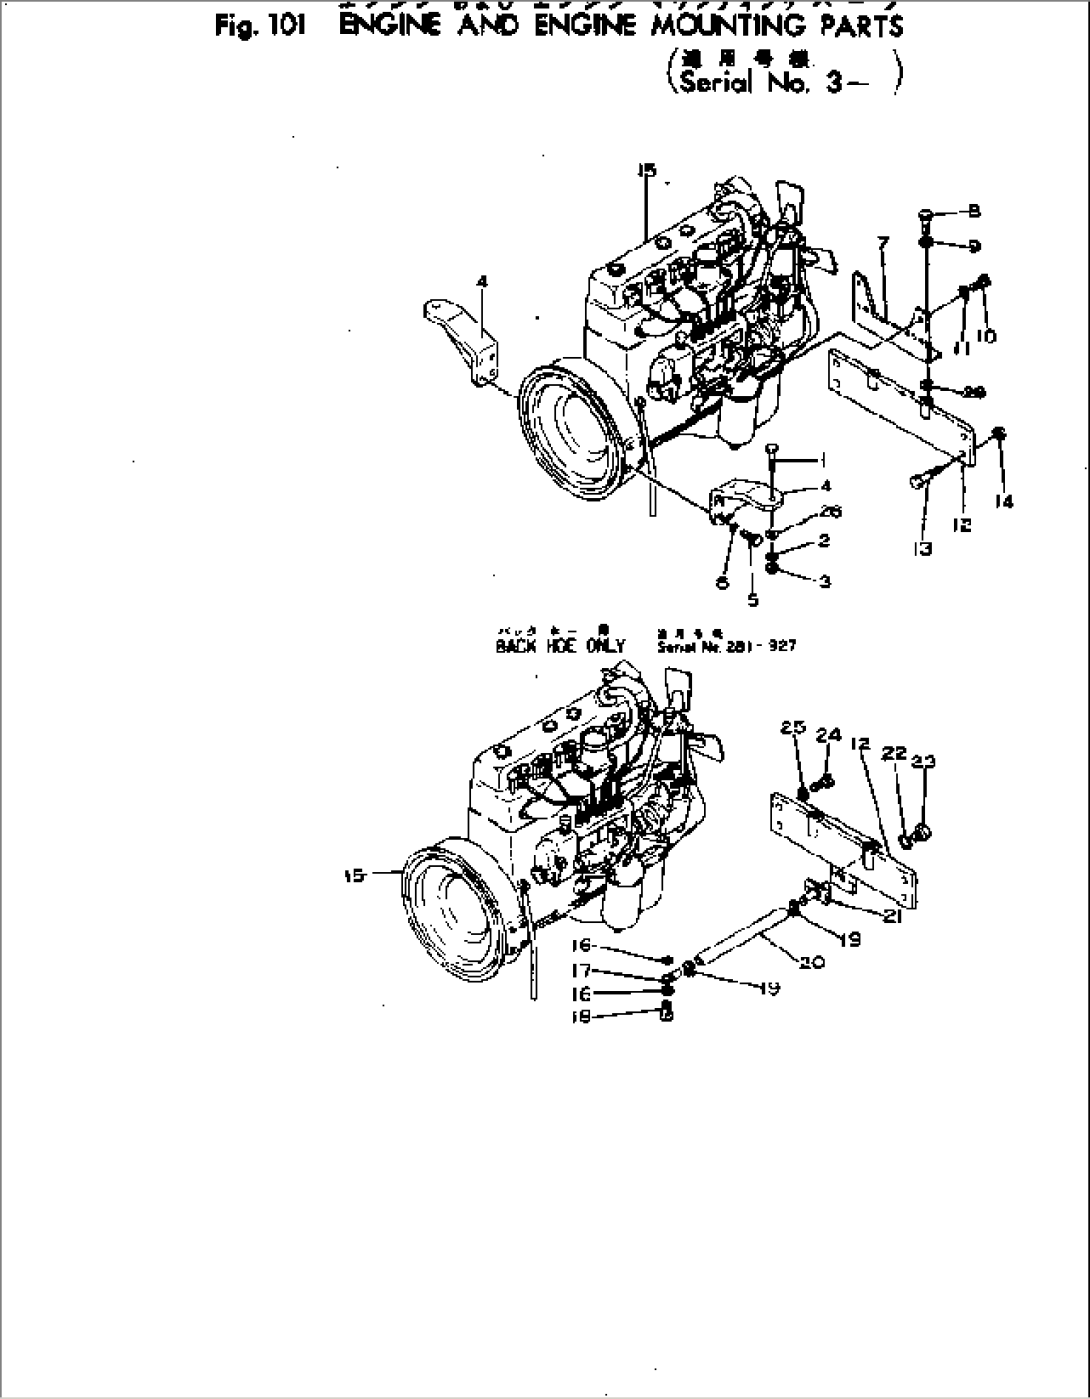 ENGINE AND ENGINE MOUNTING PARTS